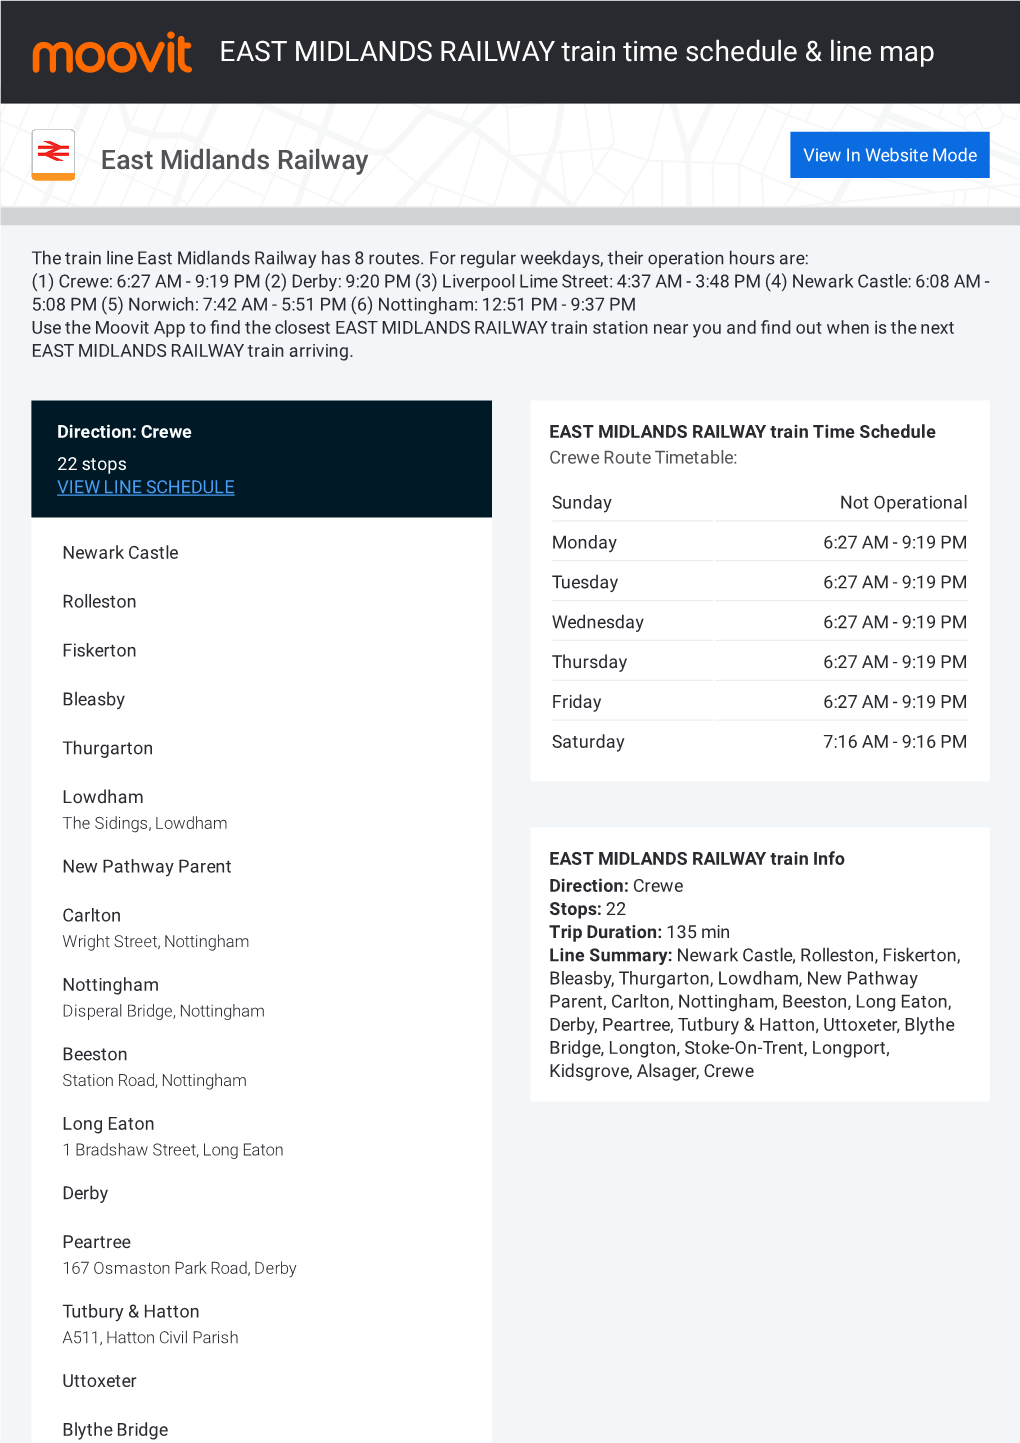 EAST MIDLANDS RAILWAY Train Time Schedule & Line Route